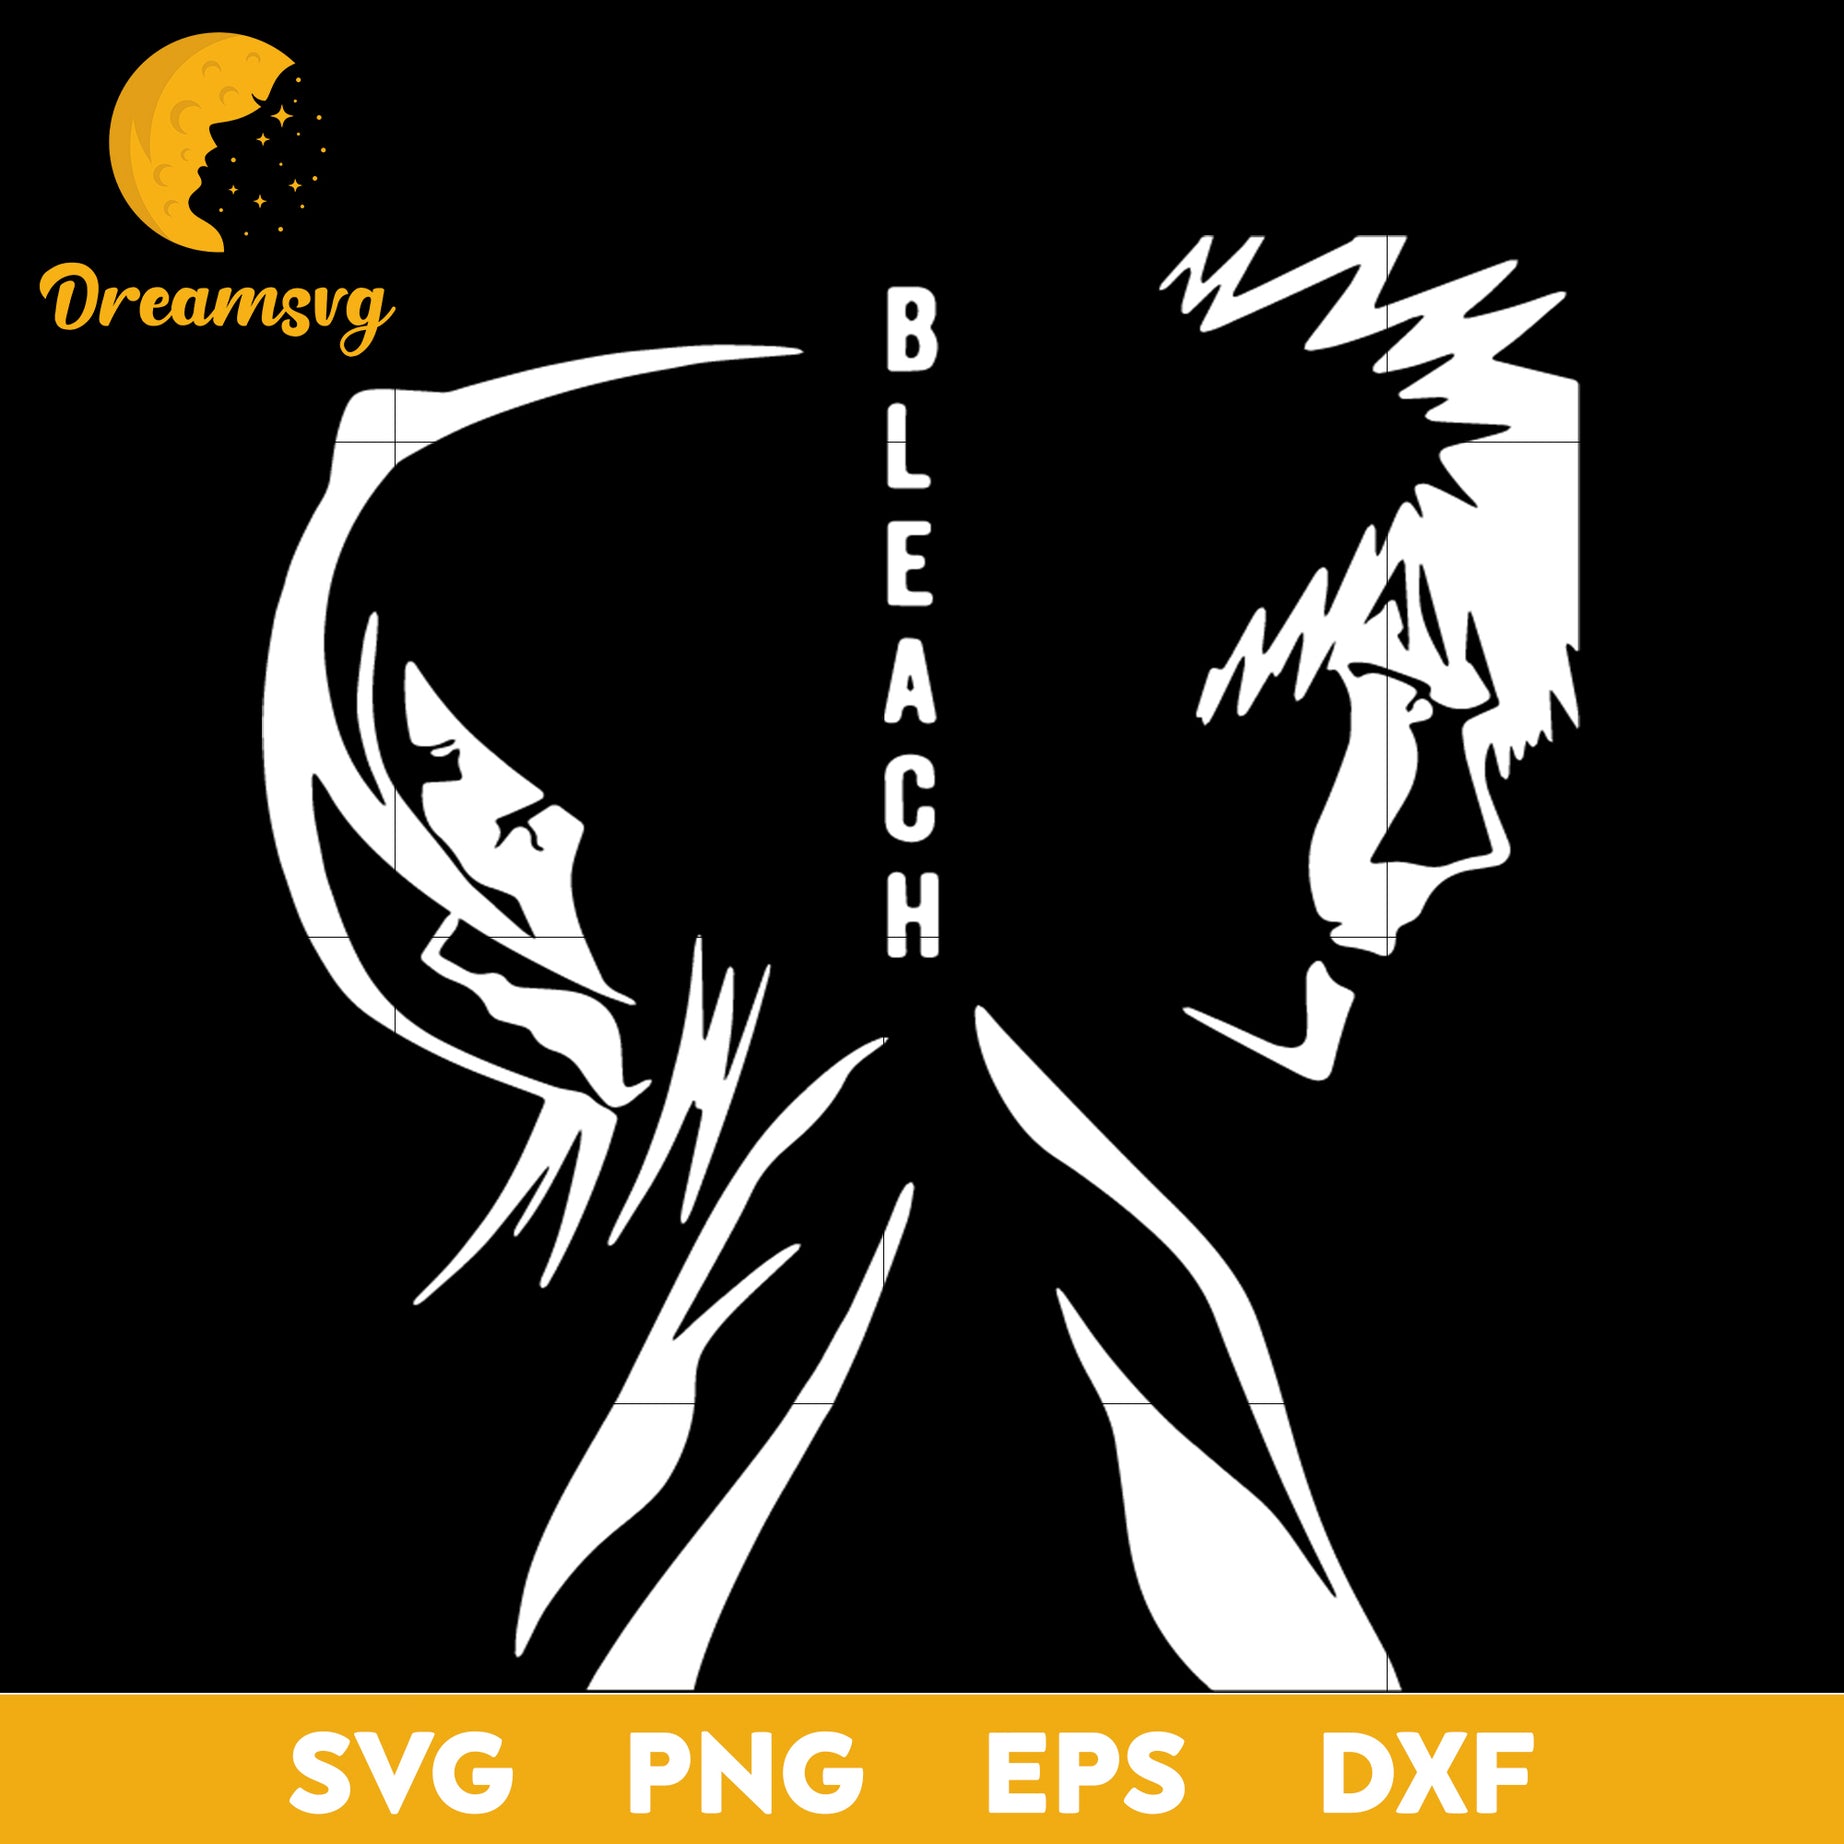 Bleach Characters SVG, Bleach SVG, Anime Cartoon SVG, file for cricut, Anime svg, png, eps, dxf digital download